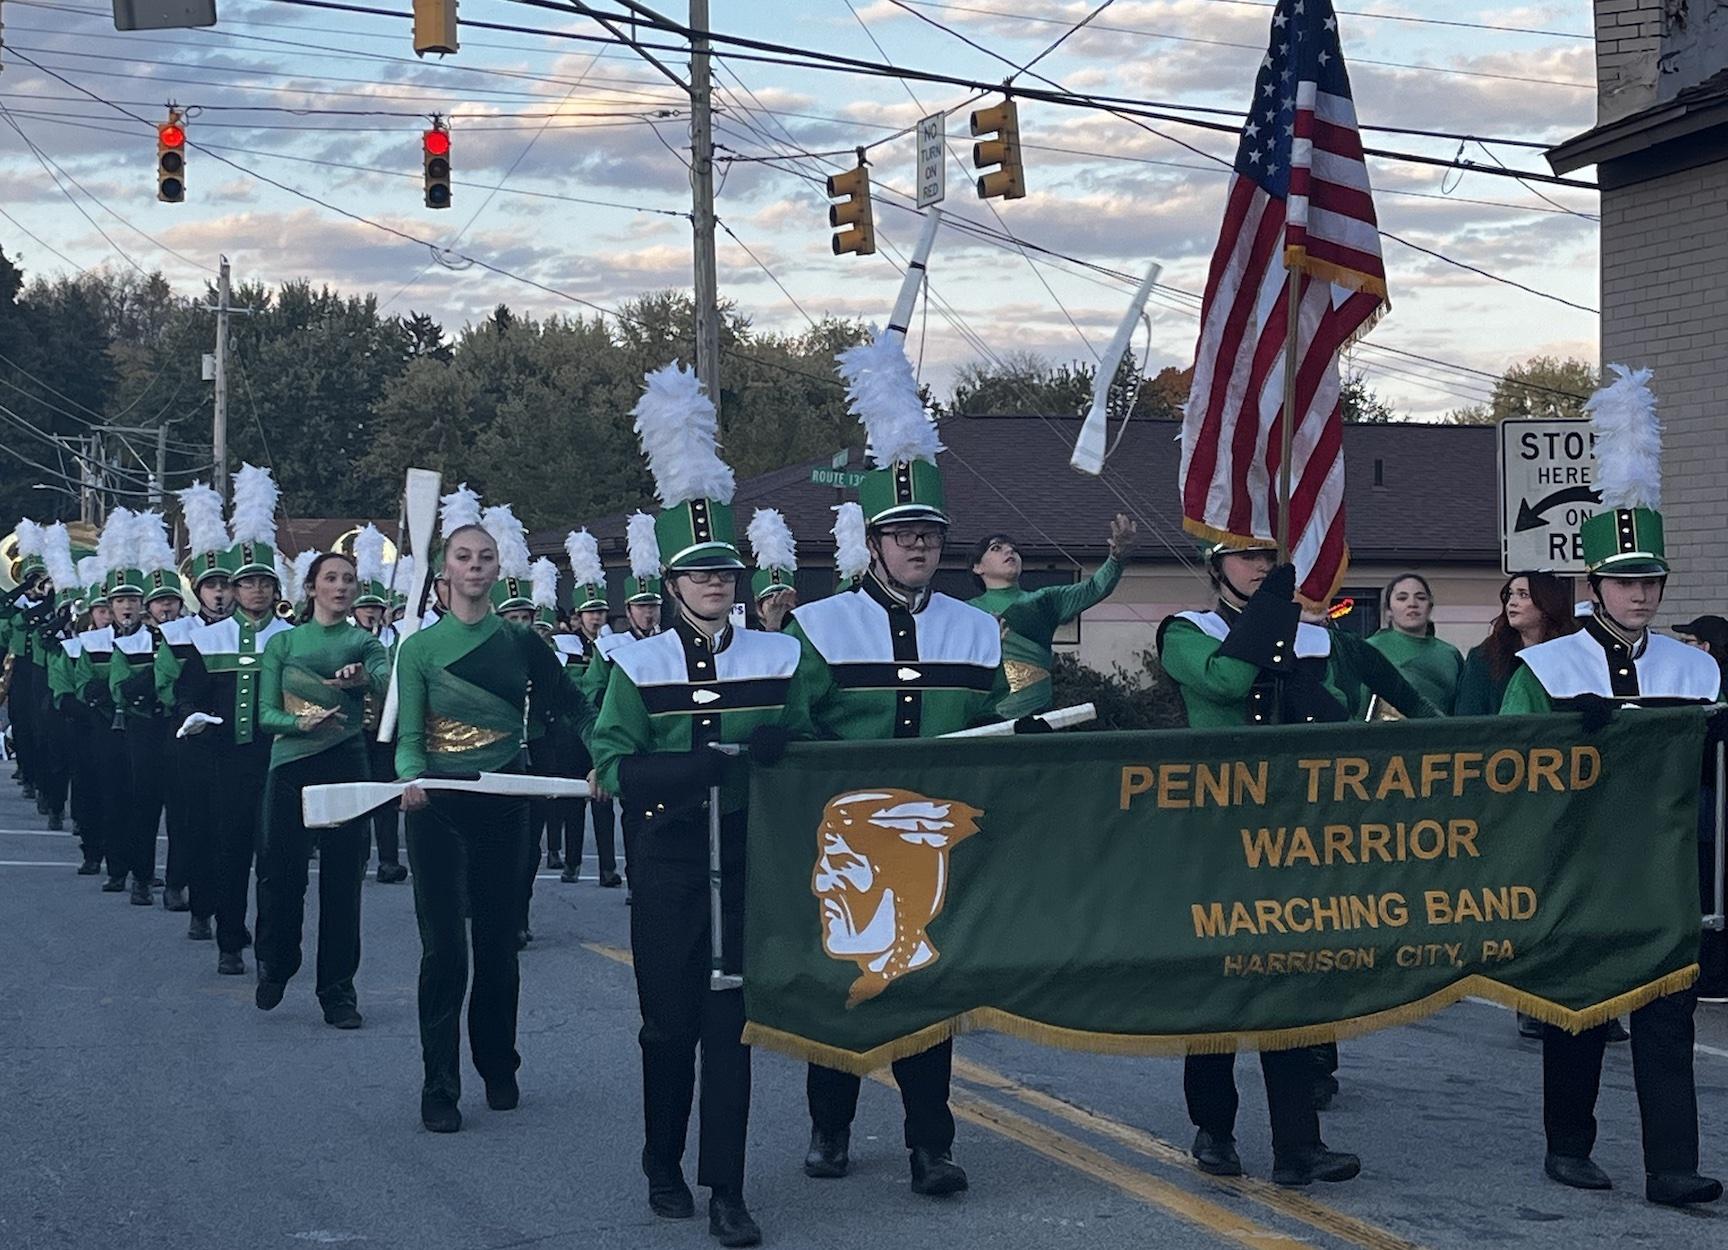 The Penn-Trafford Marching Band led the parade